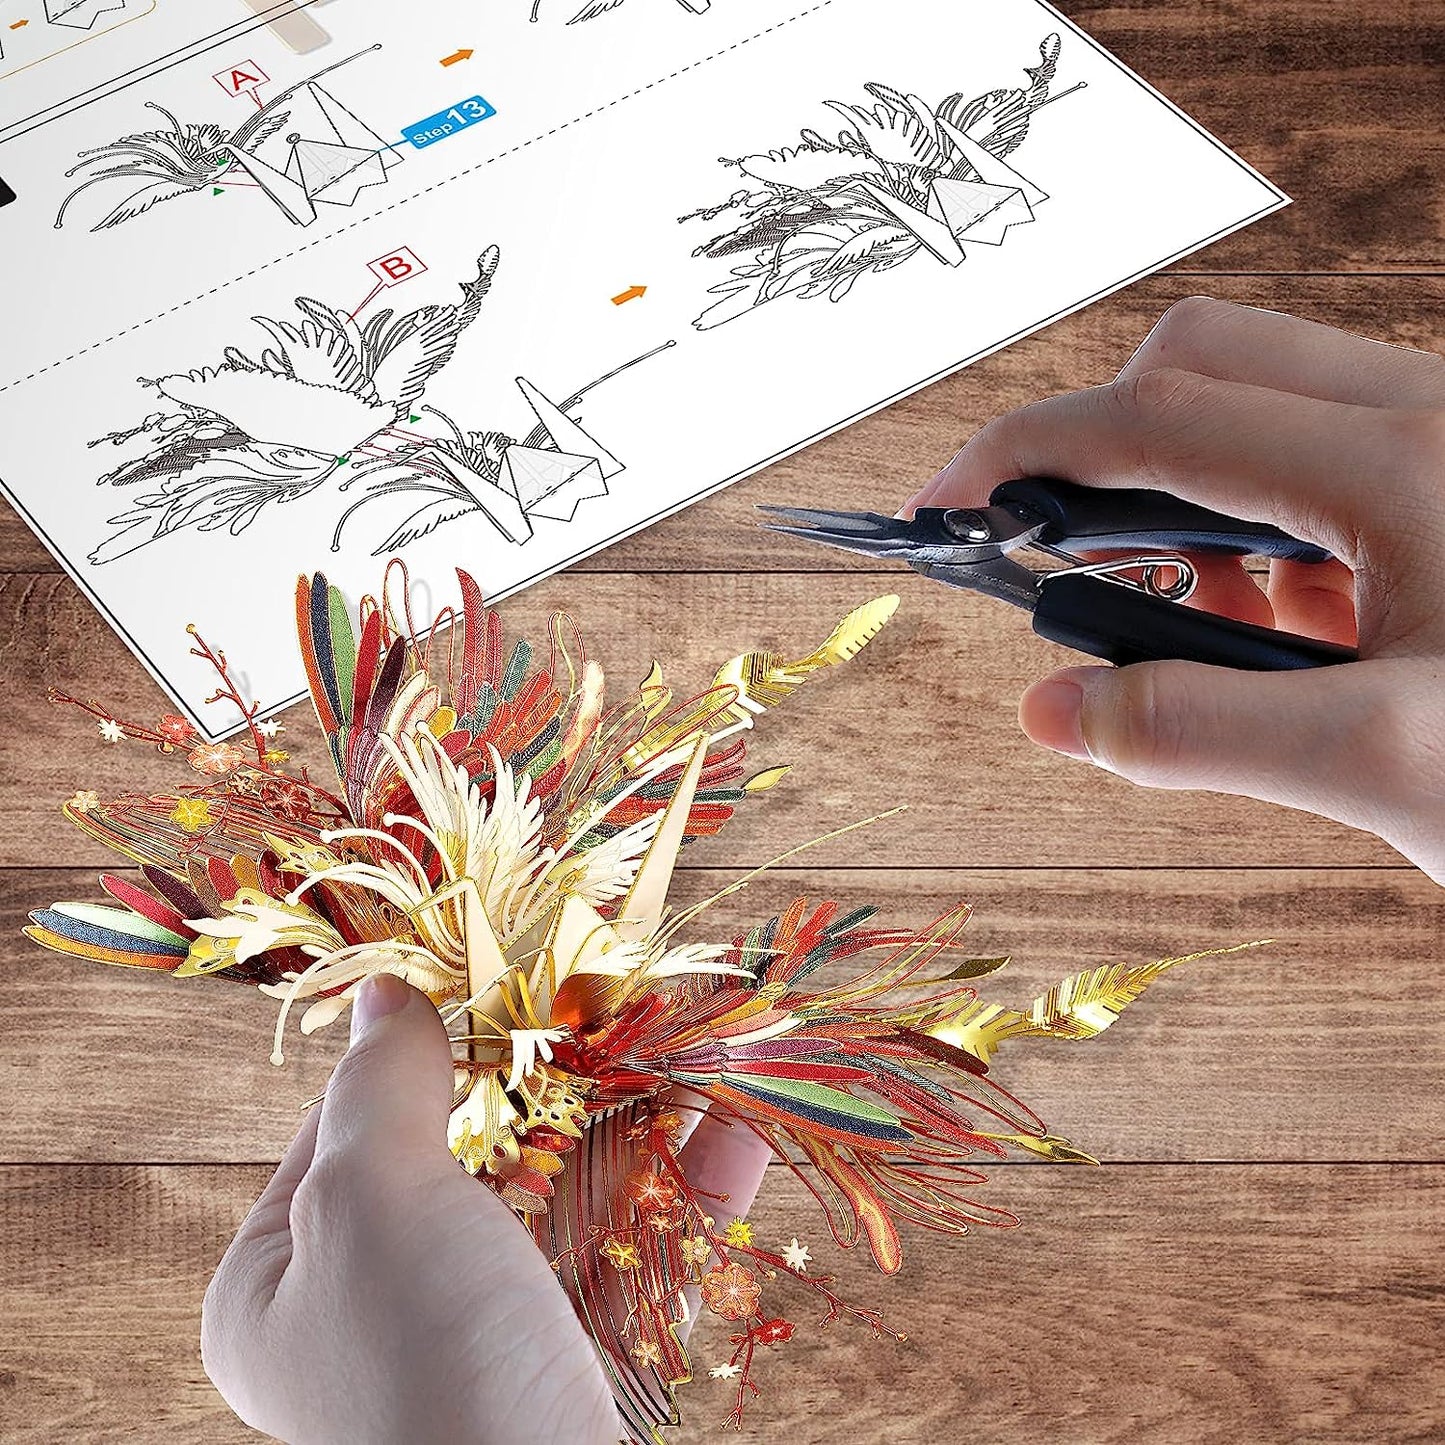 Piececool 3D Metal Puzzles, Wish Cranes-Lucky Amulet Model Kits, Gifts for Christmas New Year, 38 Pcs